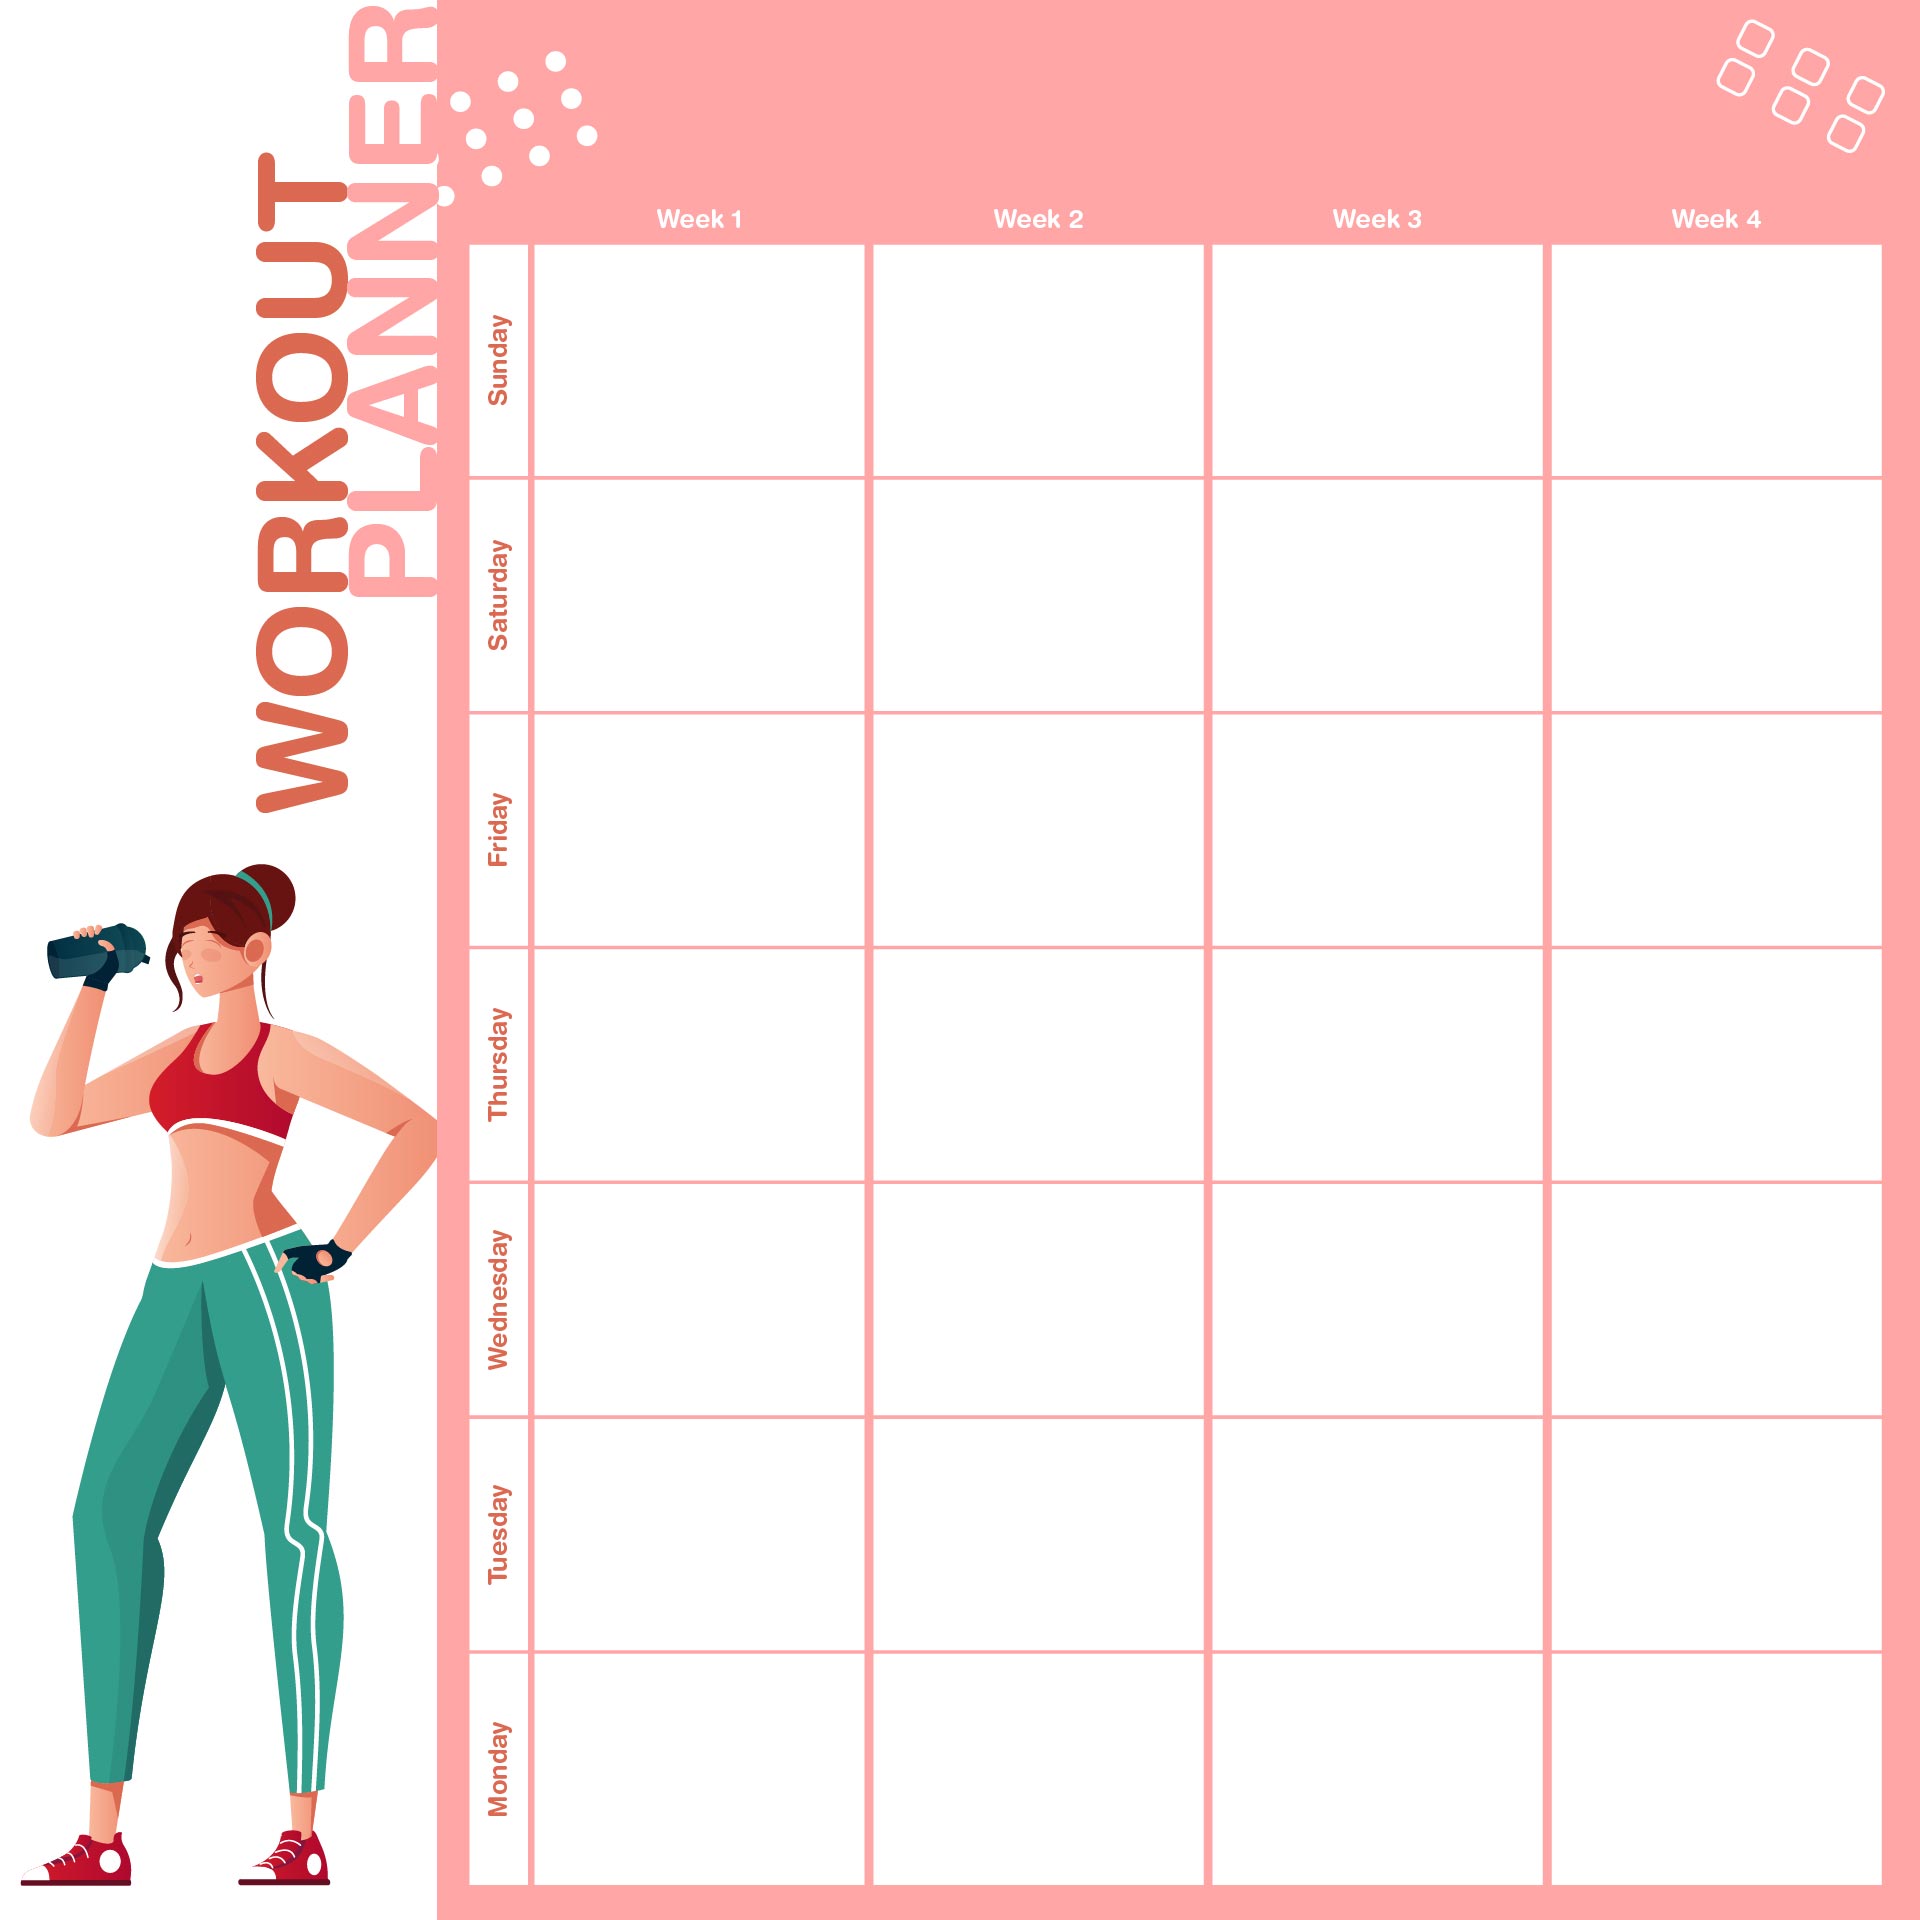 Template For Weekly Workout Schedule